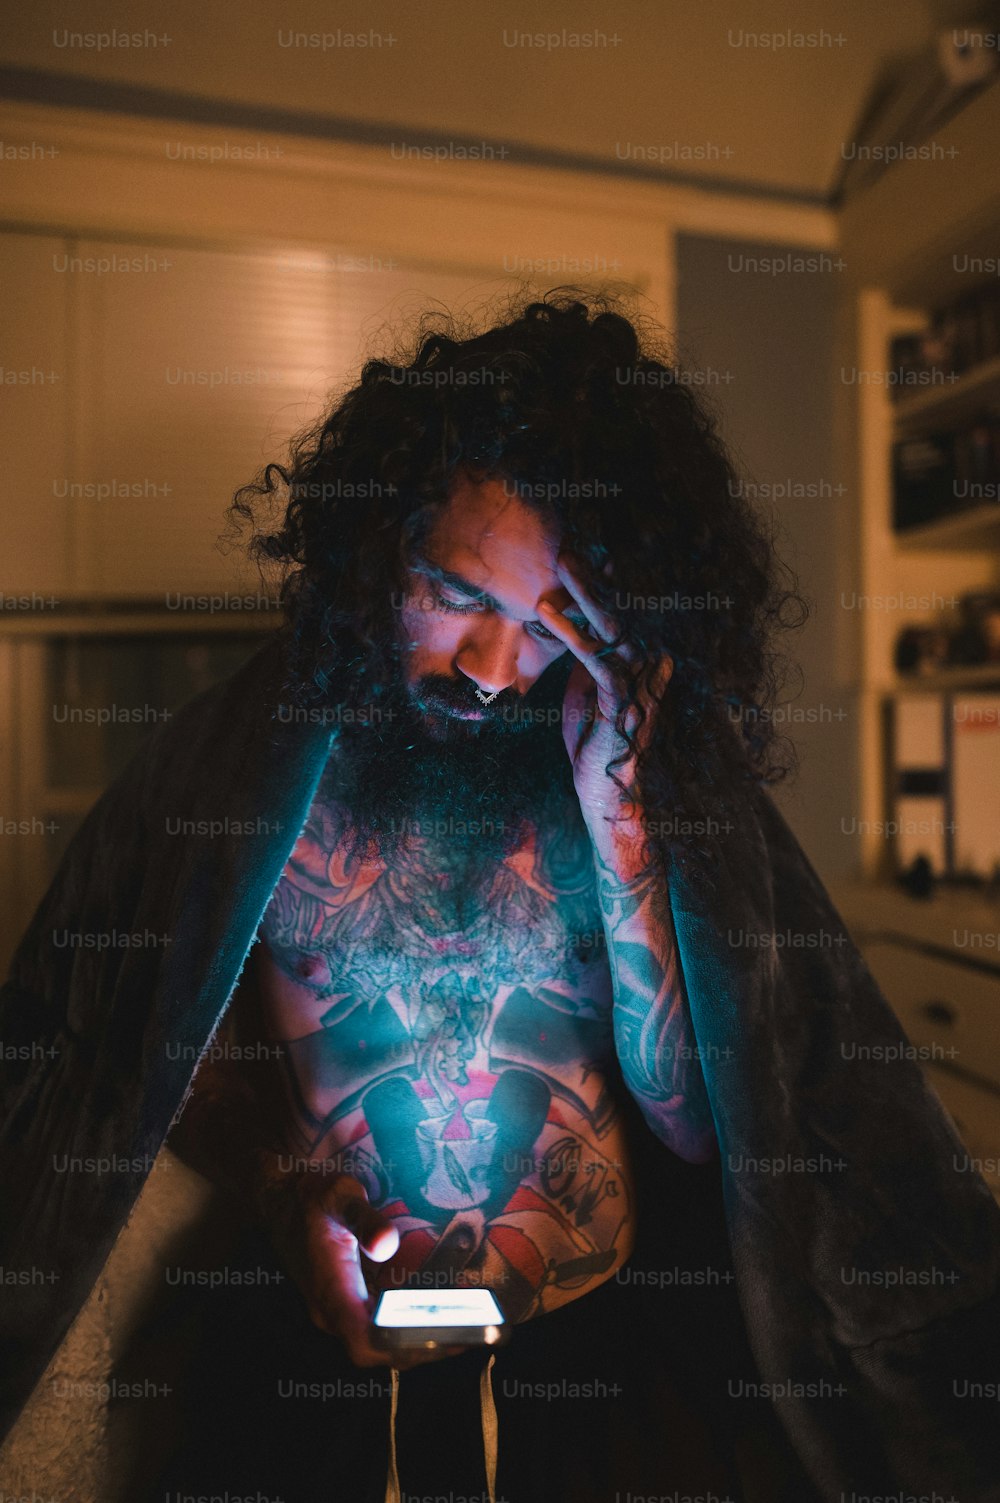 a man with long hair and tattoos holding a cell phone